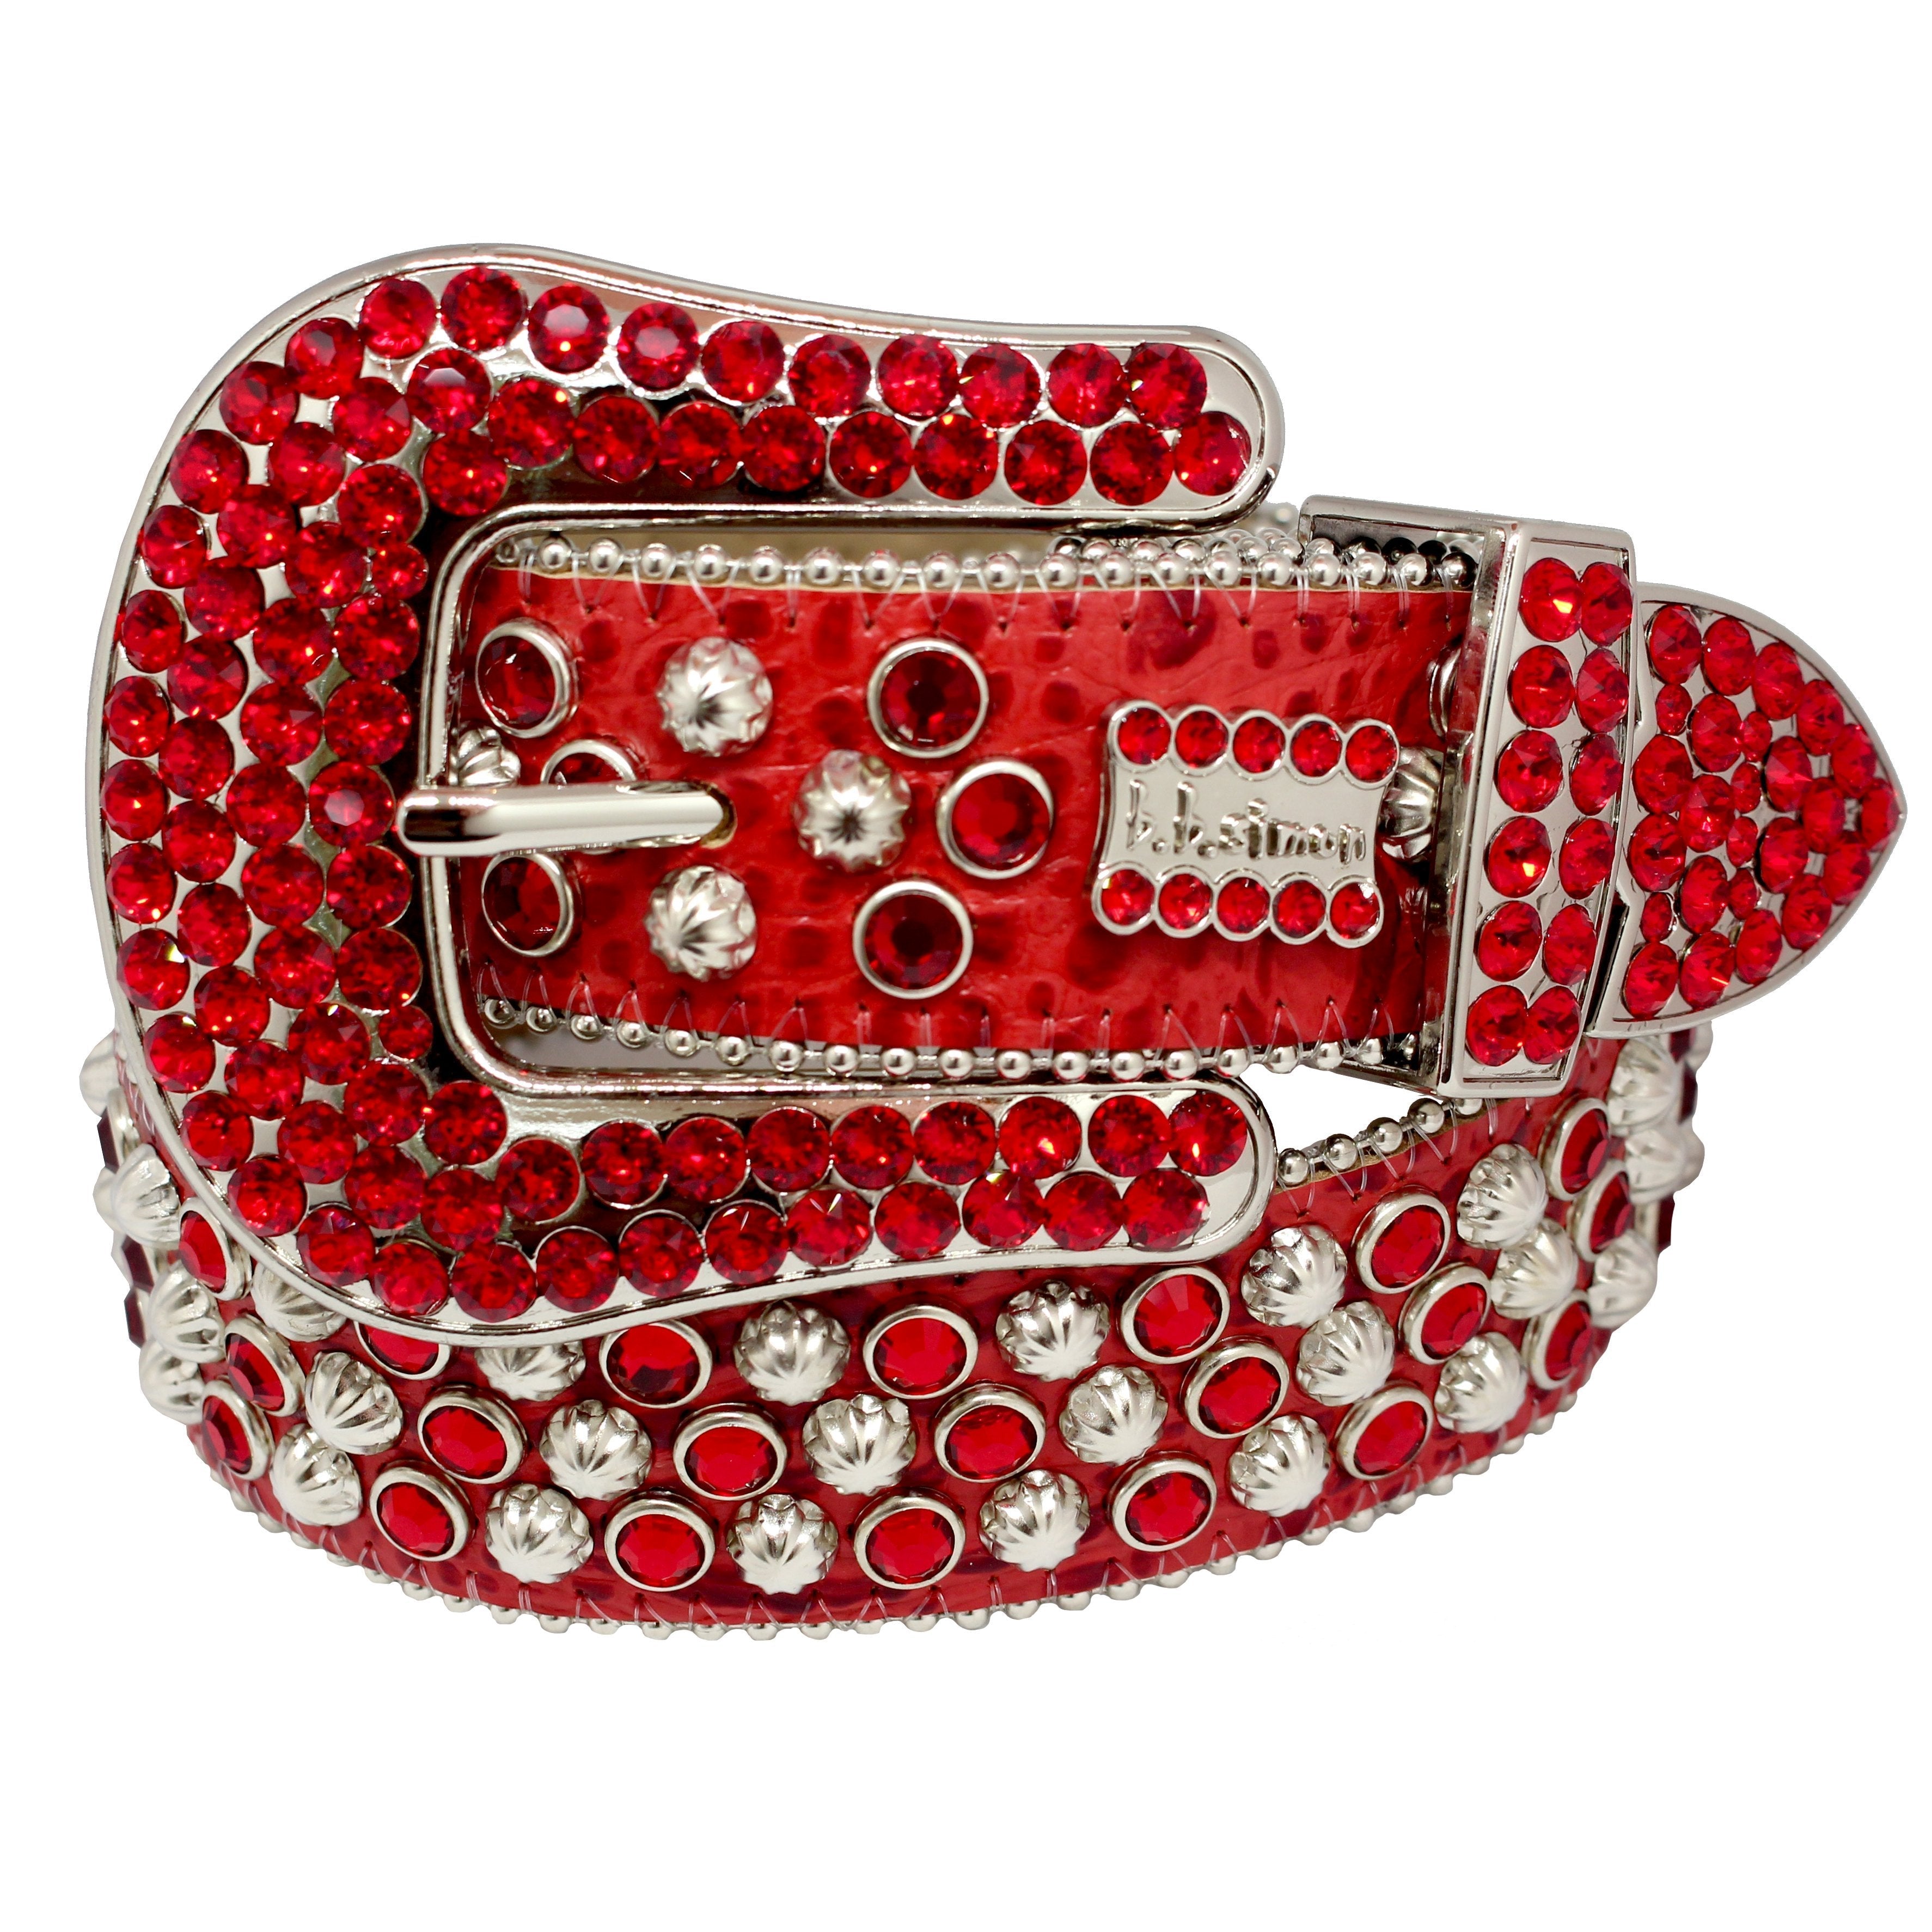 Leather belt BB SIMON Red size 100 cm in Leather - 33753762